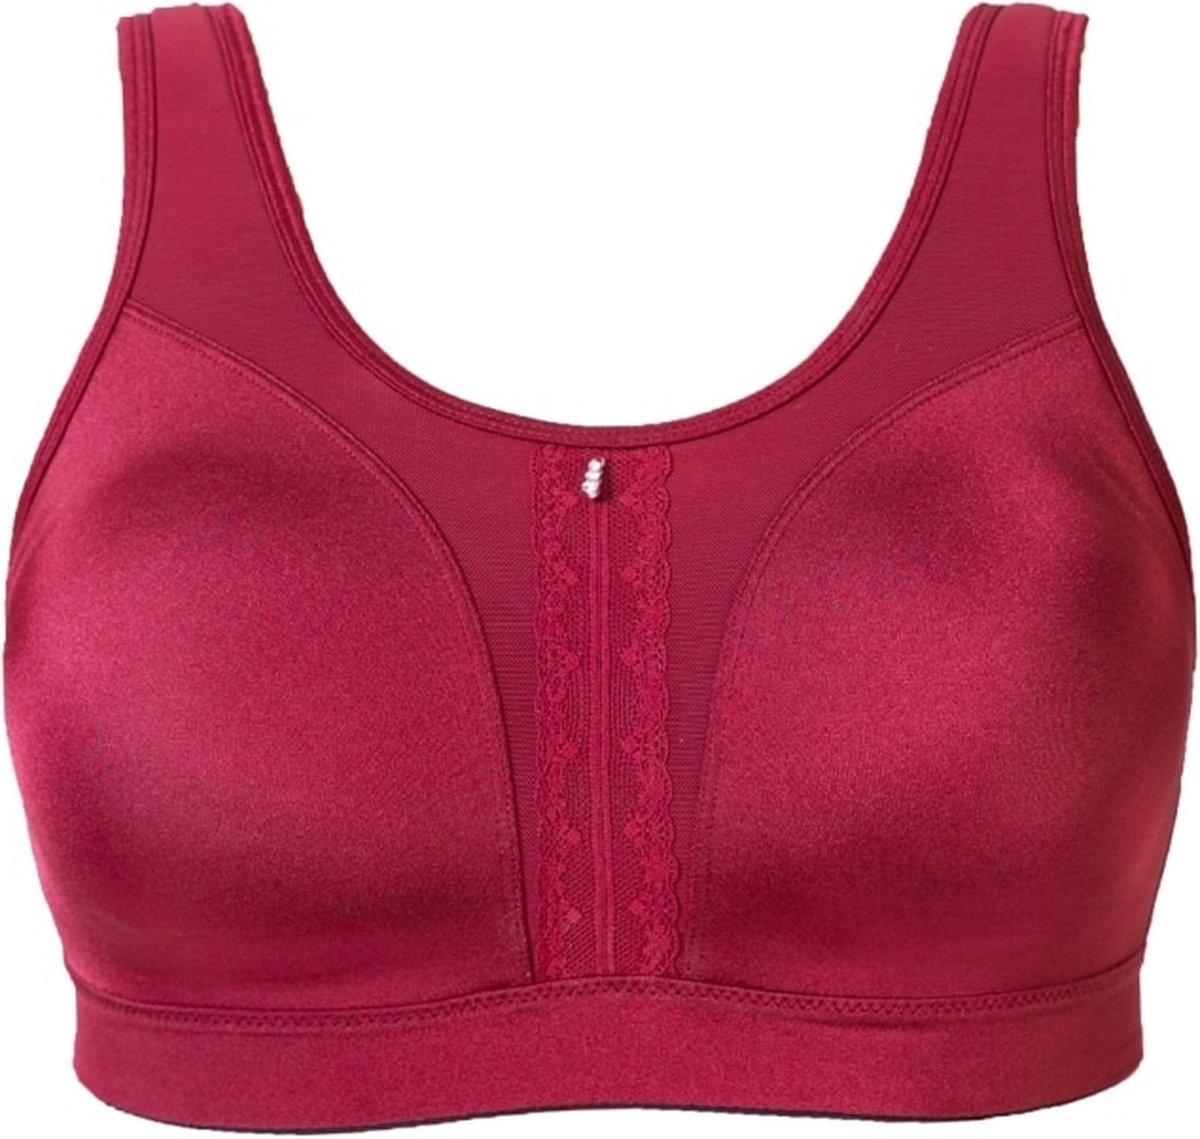 High impact Sport BH (zonder beugel) Cannes, Deep Red / Bordeaux rood, maat: 90E